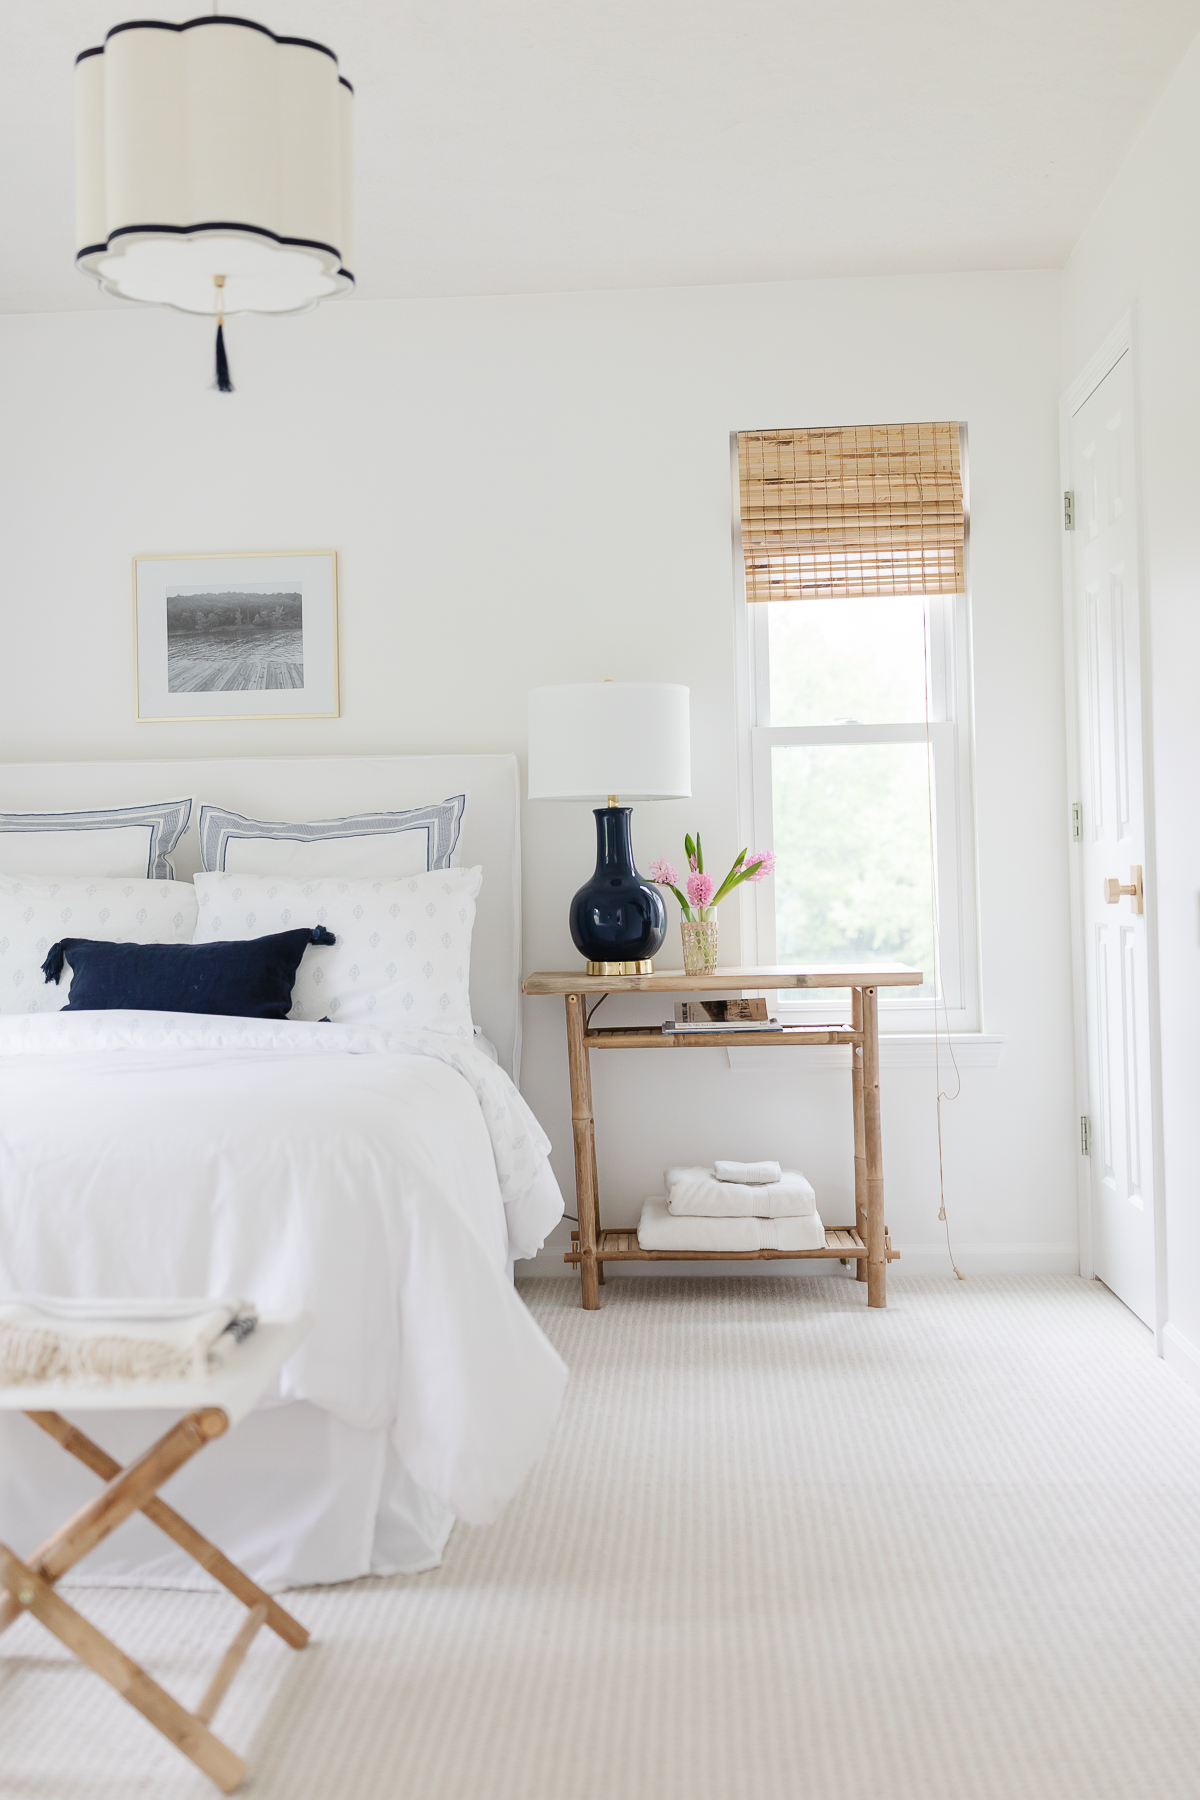 A white bedroom with rattan accents